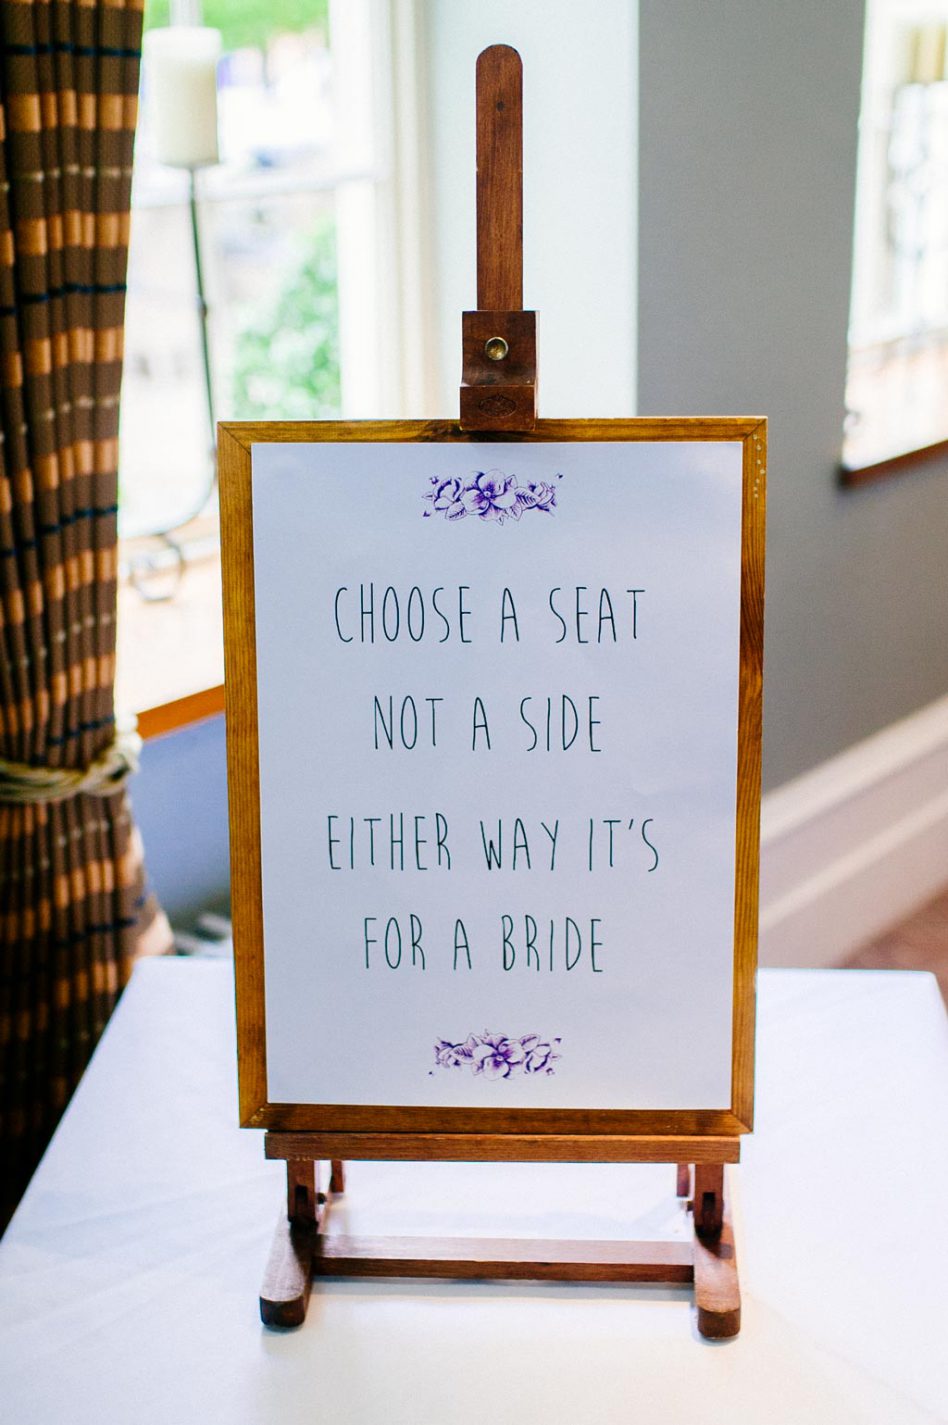 Coose a seat not a side either way it's for a bride